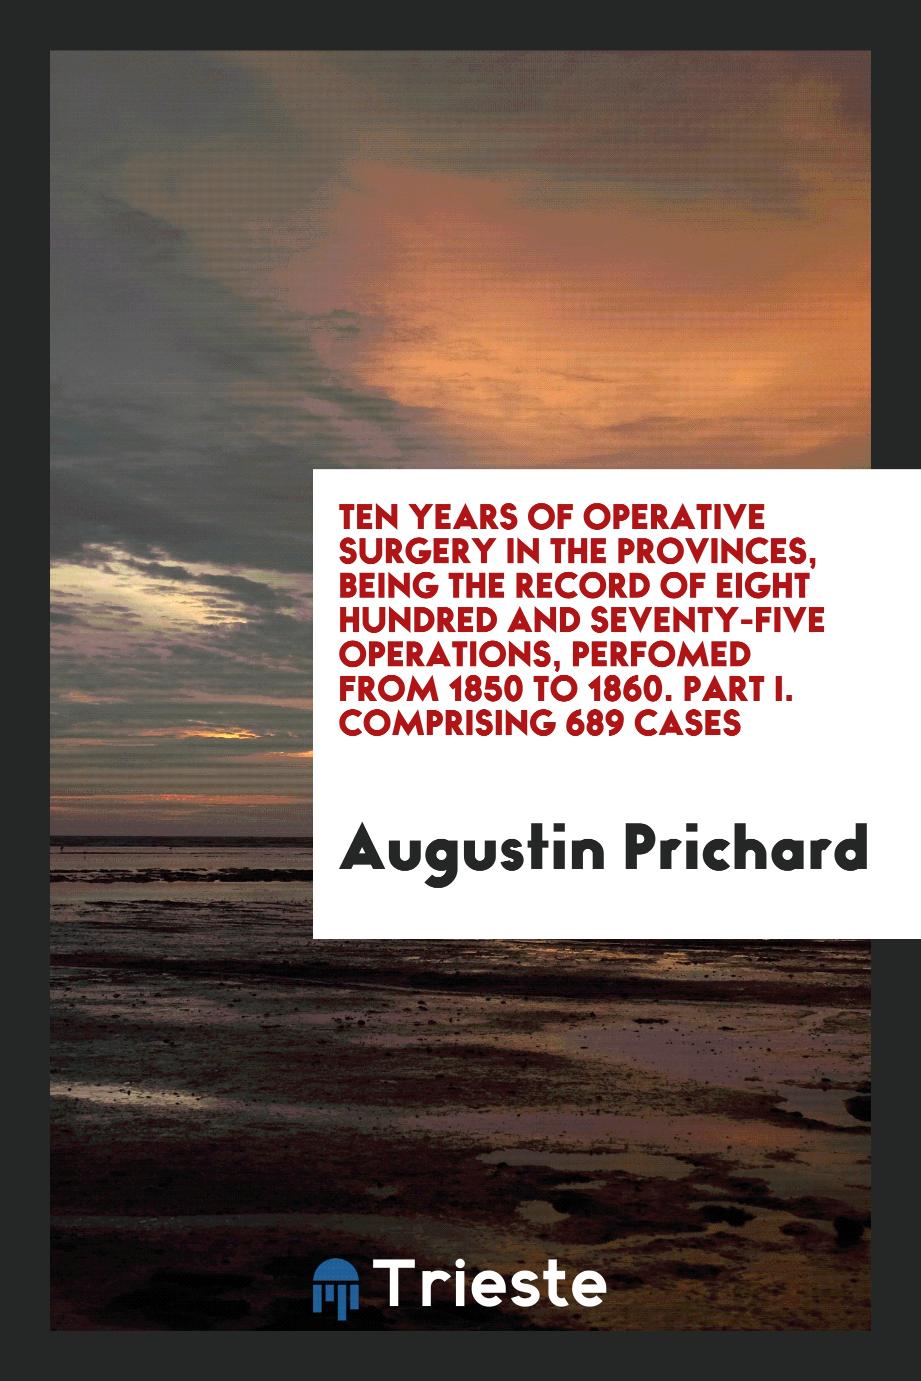 Ten Years of Operative Surgery in the Provinces, Being the Record of Eight Hundred and Seventy-Five Operations, Perfomed from 1850 to 1860. Part I. Comprising 689 Cases